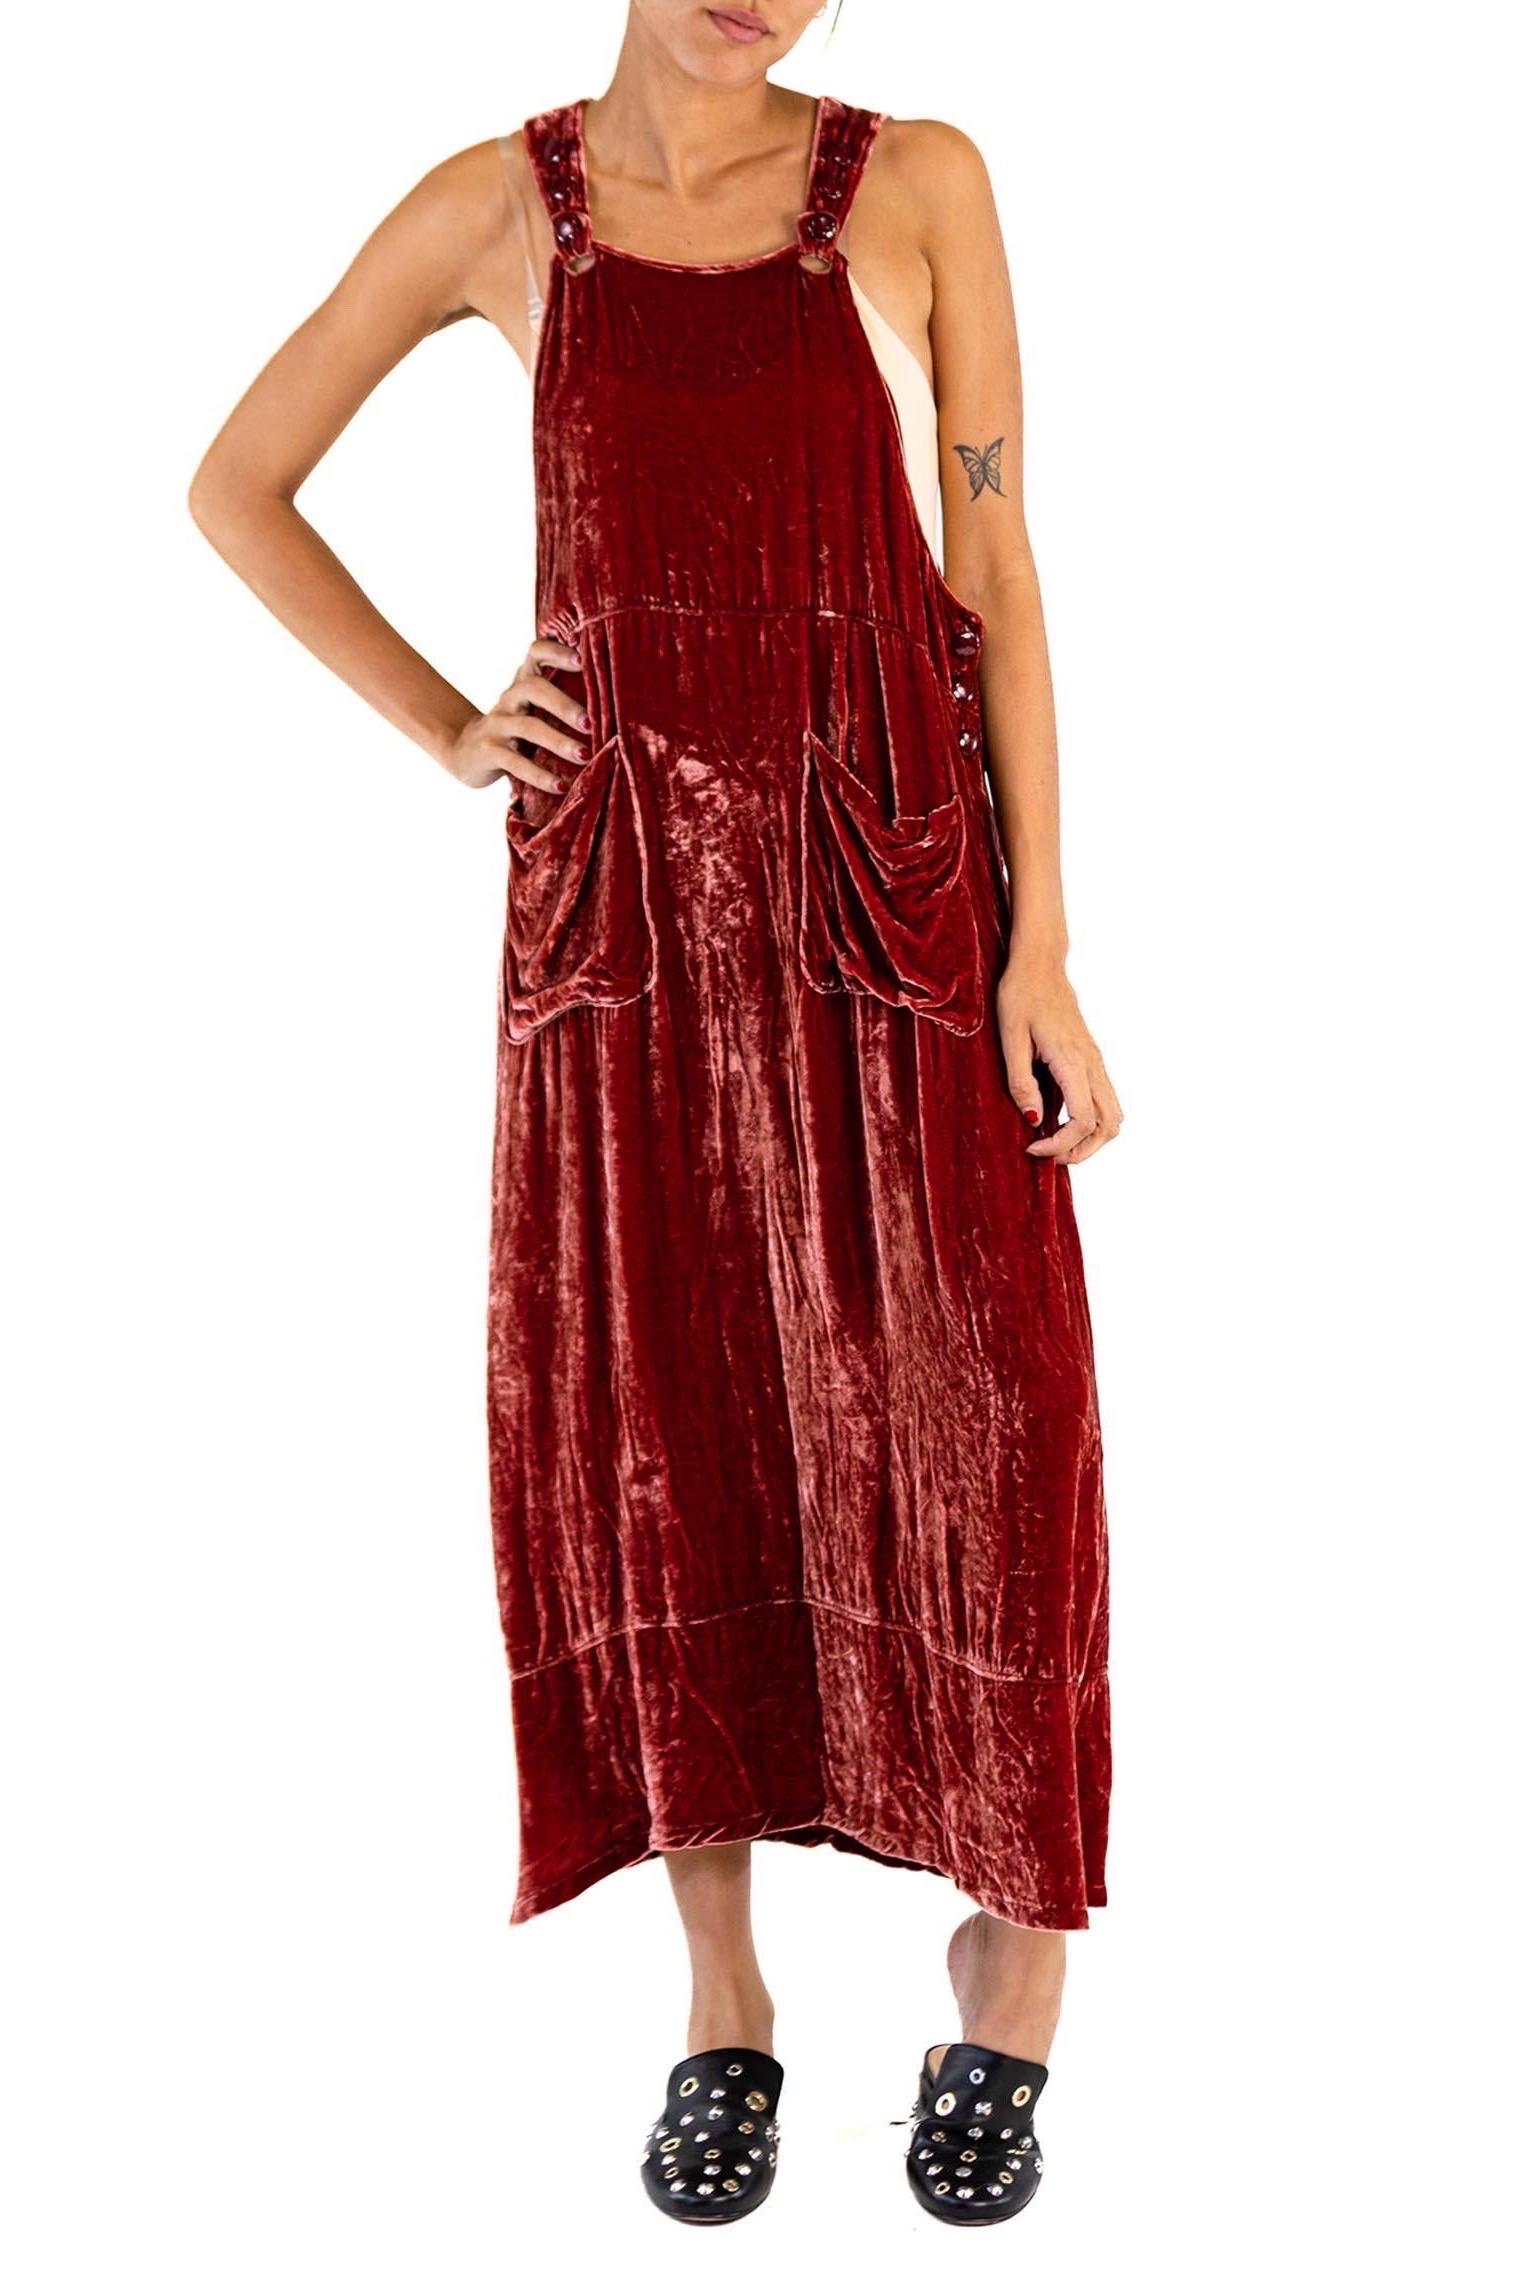 1990S Dusty Rose Silk & Rayon Crushed Velvet Overalls Style Dress With Large Bu For Sale 3